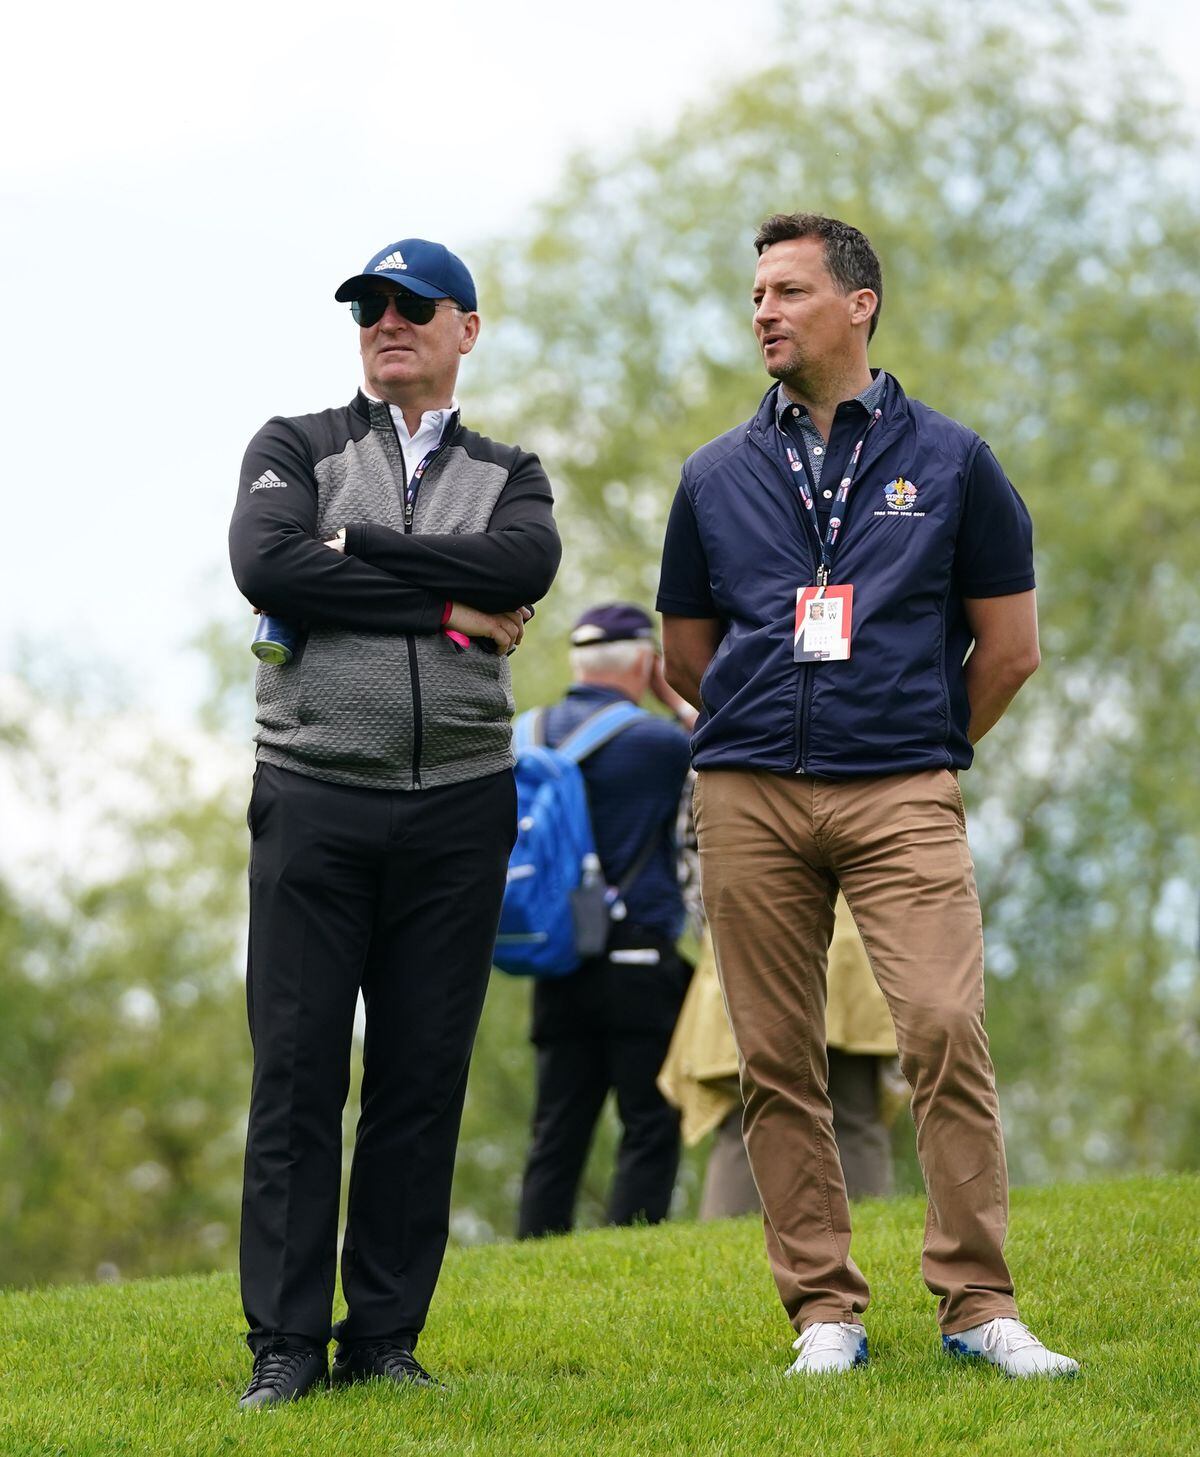 Norwich City manager Dean Smith (left) during day one of Betfred British Masters at The Belfry, Sutton Coldfield. Picture date: Thursday May 5, 2022. PA Photo. See PA story GOLF British. Photo credit should read: Zac Goodwin/PA Wire. ..RESTRICTIONS: Use subject to restrictions. Editorial use only, no commercial use without prior consent from rights holder..